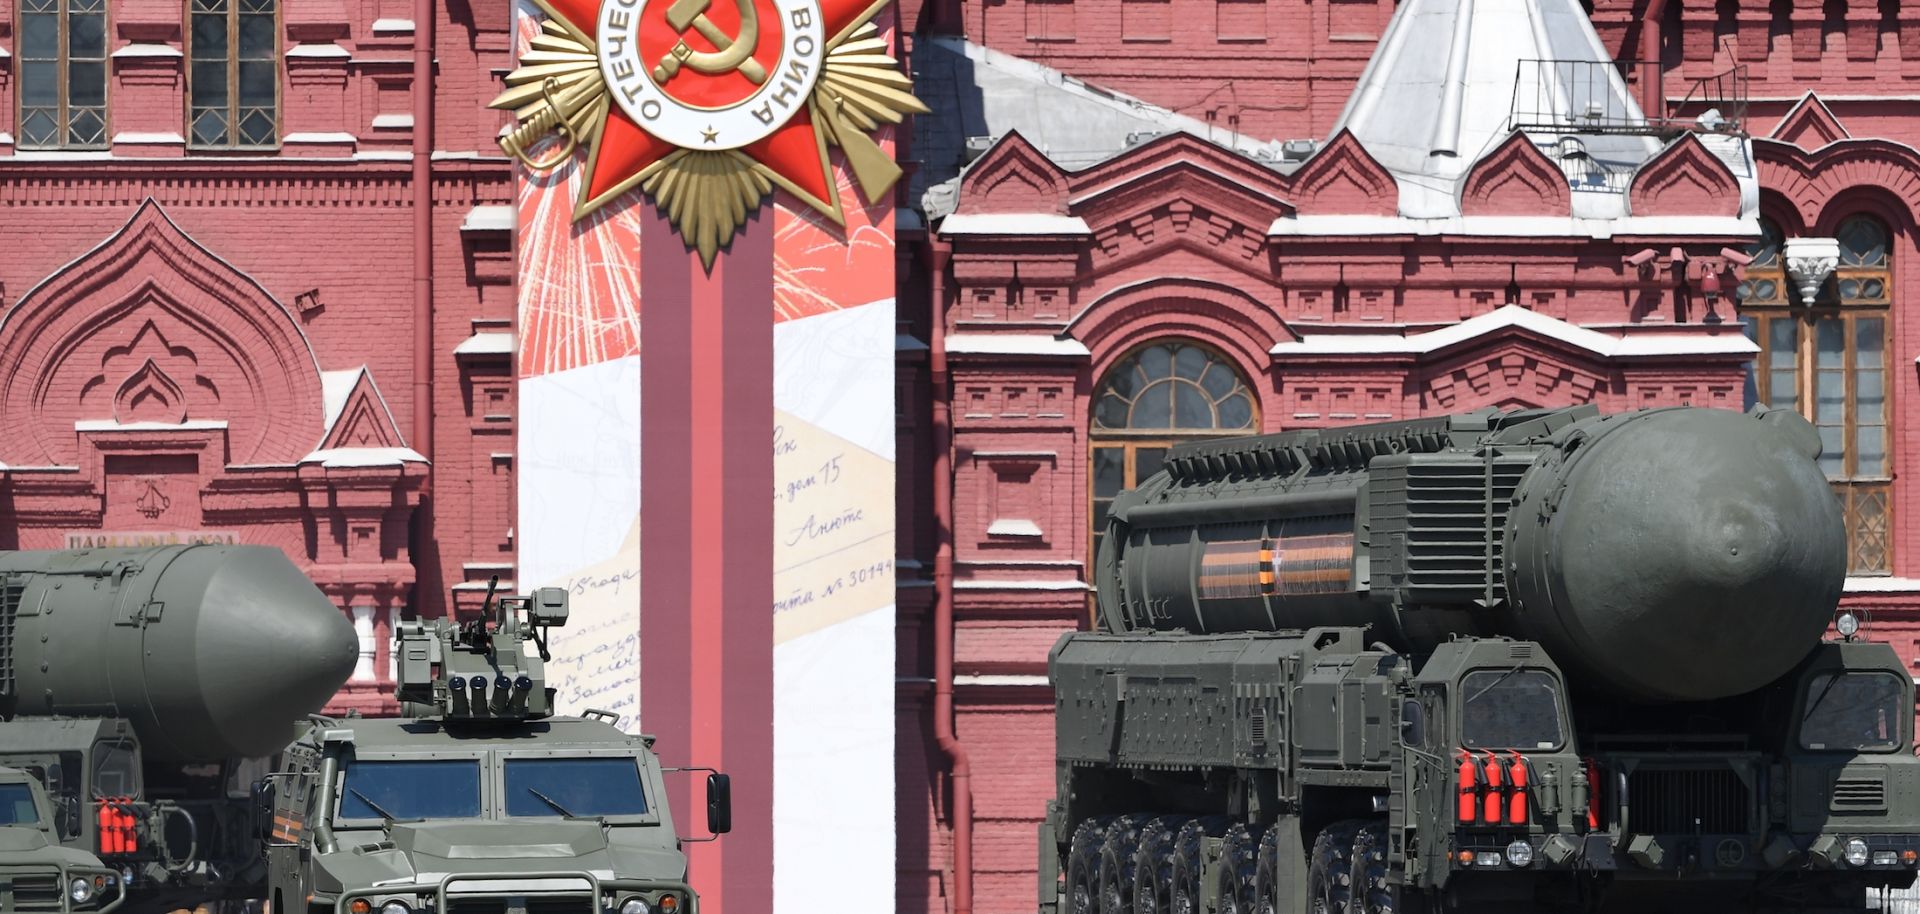 An intercontinental ballistic missile launcher and an armored vehicle are displayed during a military parade in Moscow, Russia, on June 24, 2020, to commemorate the 75th anniversary of Russia’s victory in World War II.